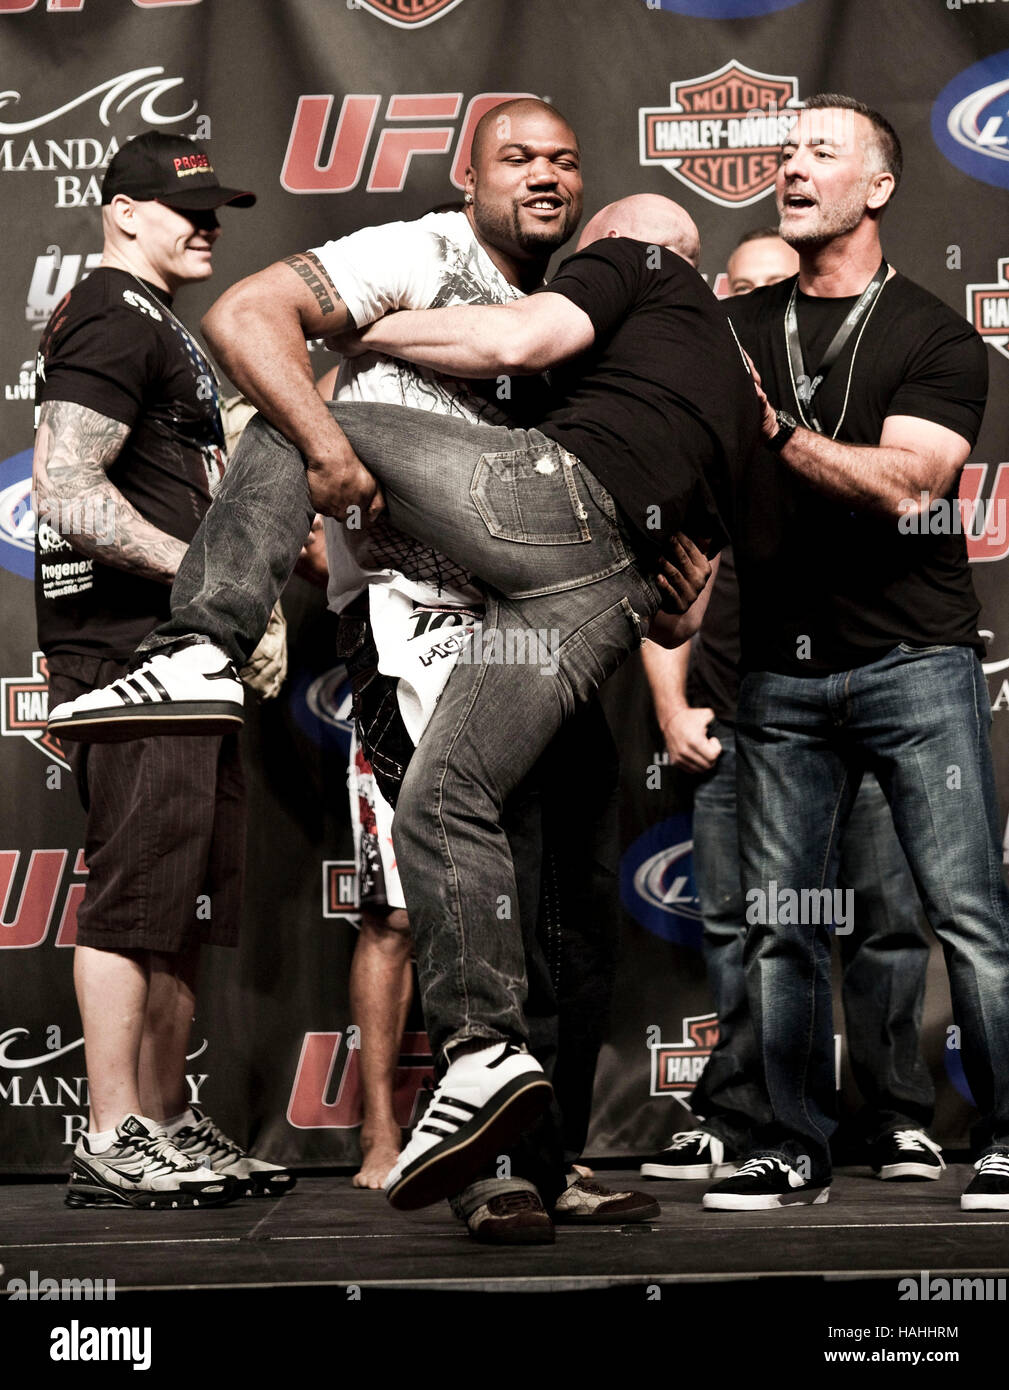 ufc-president-dana-white-is-picked-up-by-ufc-fighter-quinton-rampage-HAHHRM.jpg